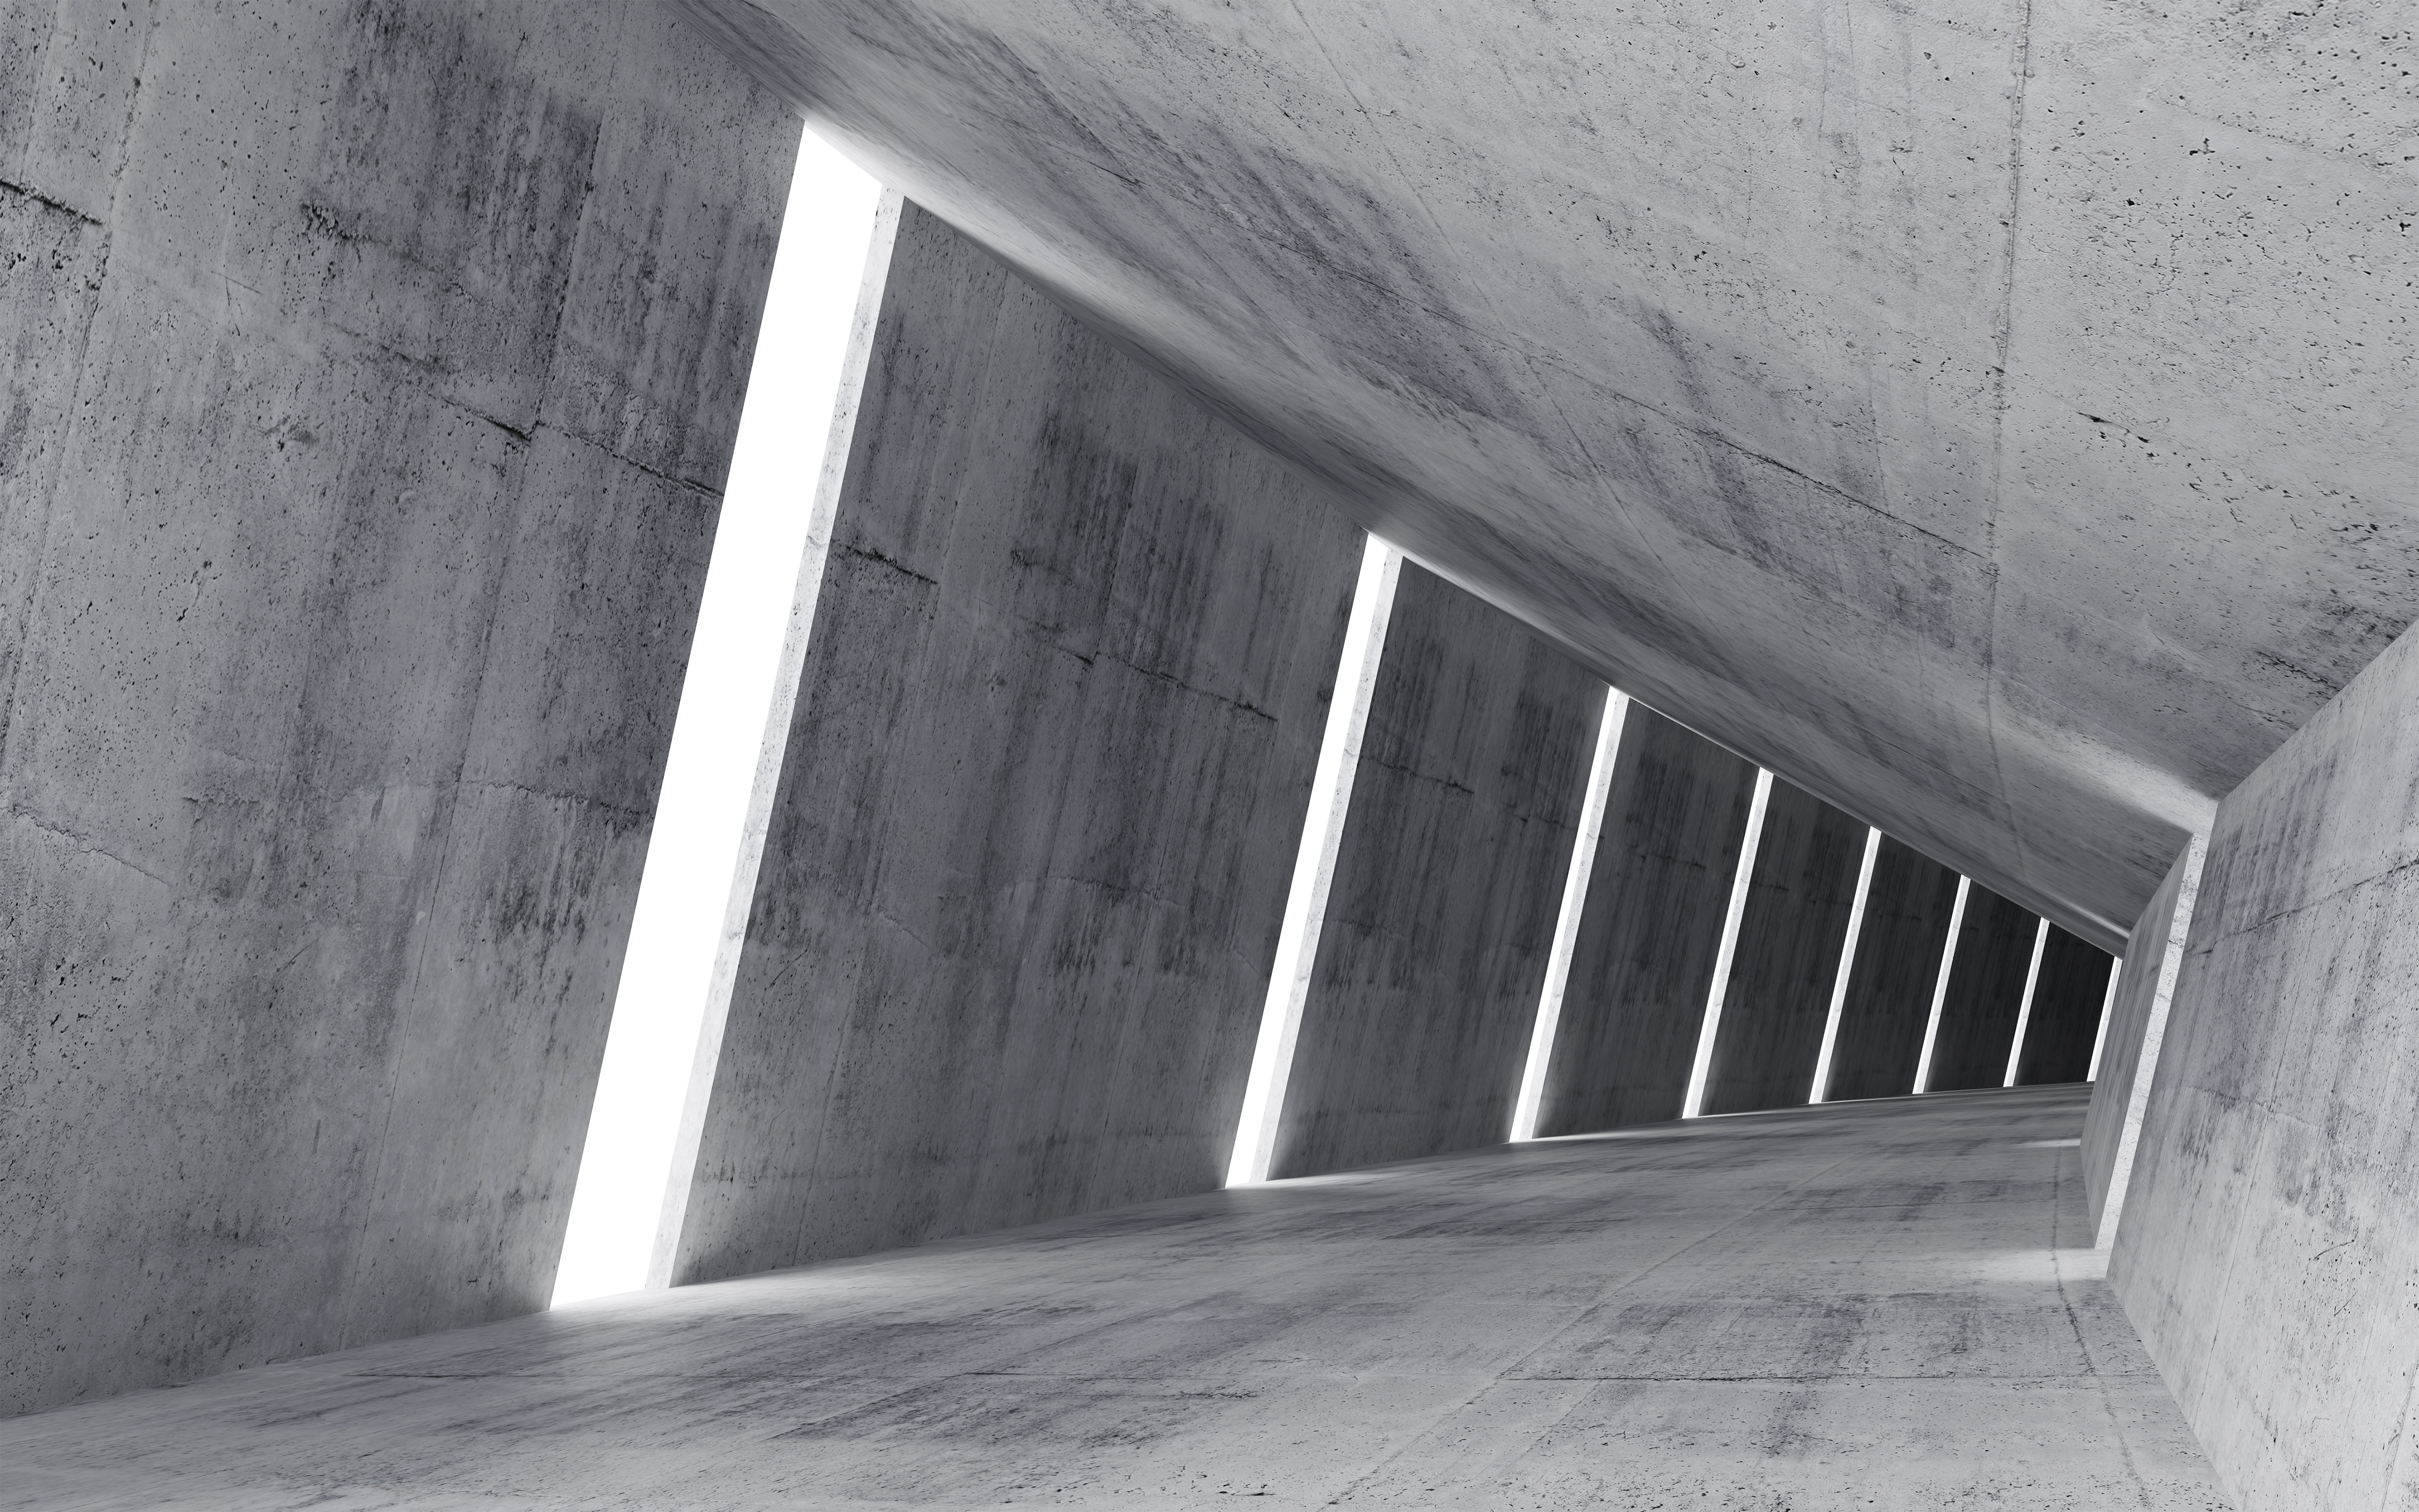 Concrete tunnel with light coming in